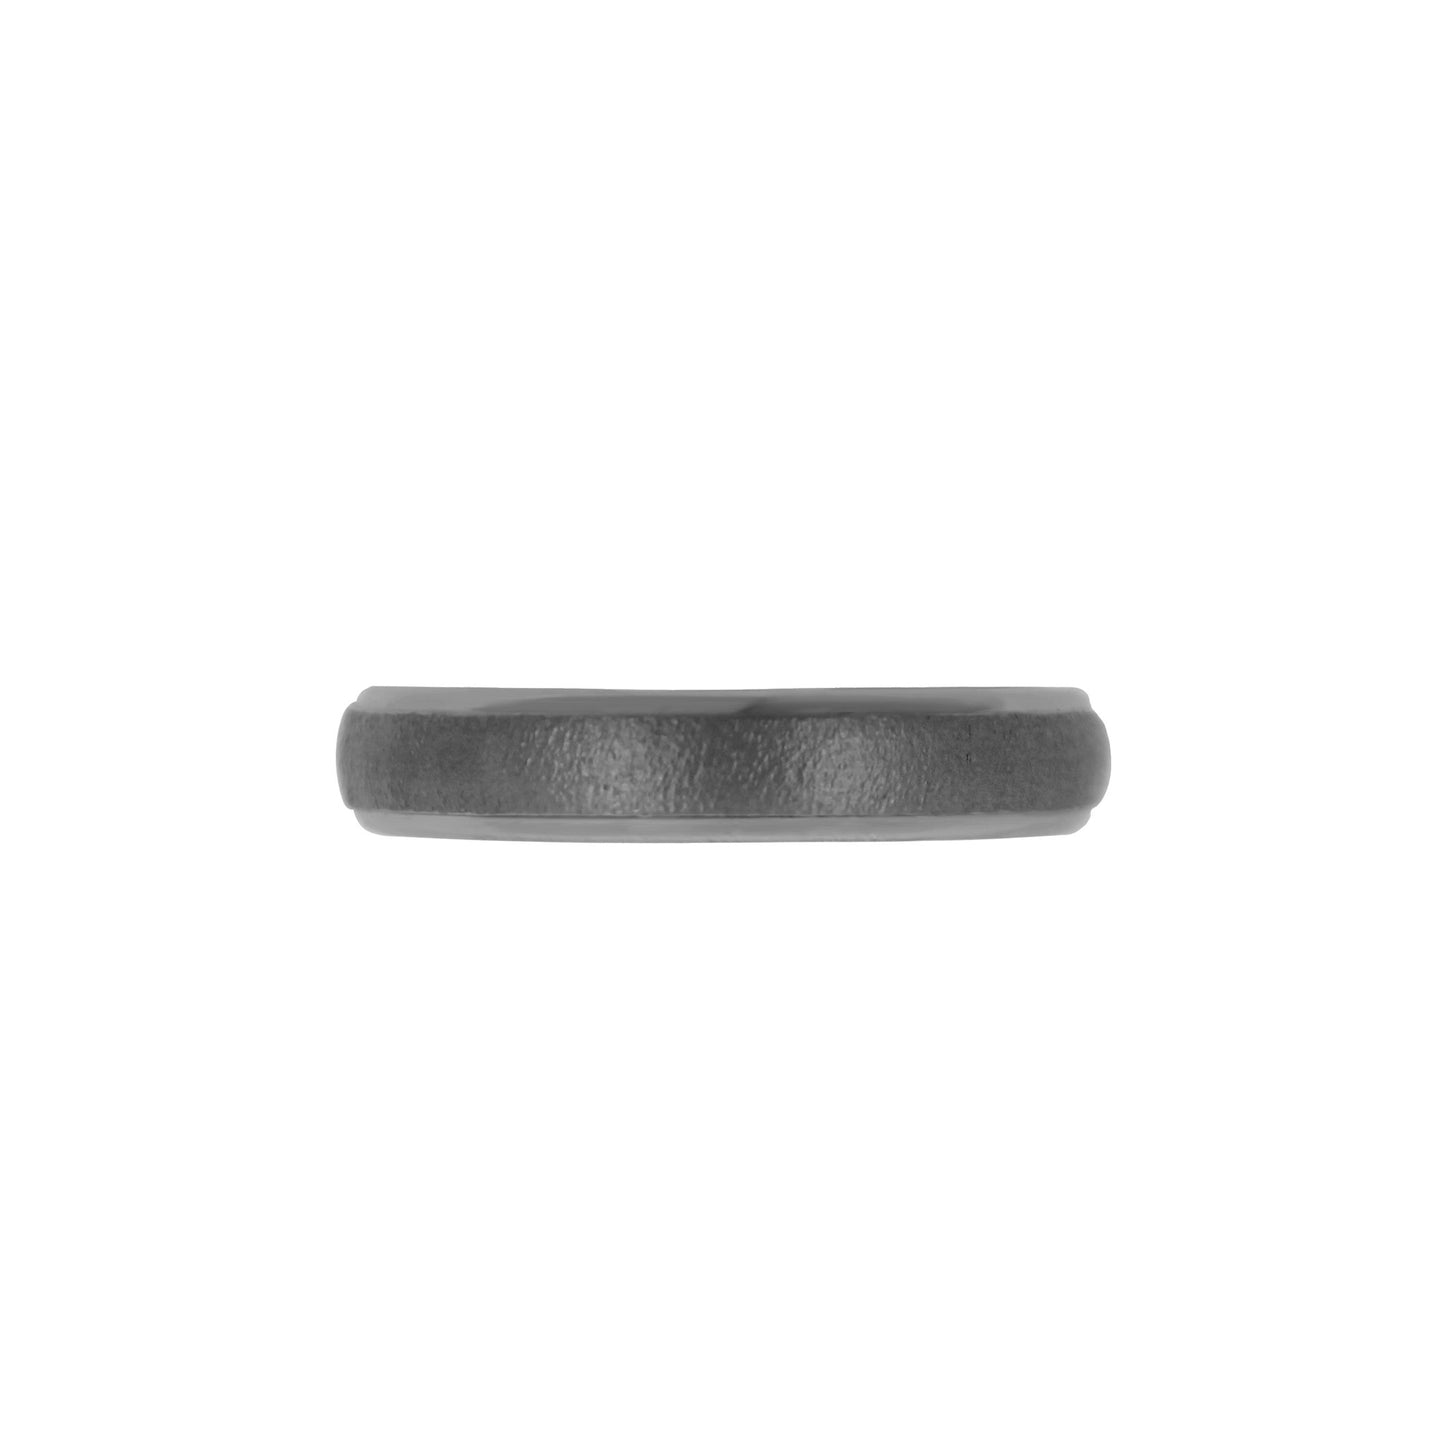 Titan Ring w/ Tantalum Fine Hammered Mat/Polished.  Ring profile: width: 5.0 mm || height: 2.7 mm. Top view.